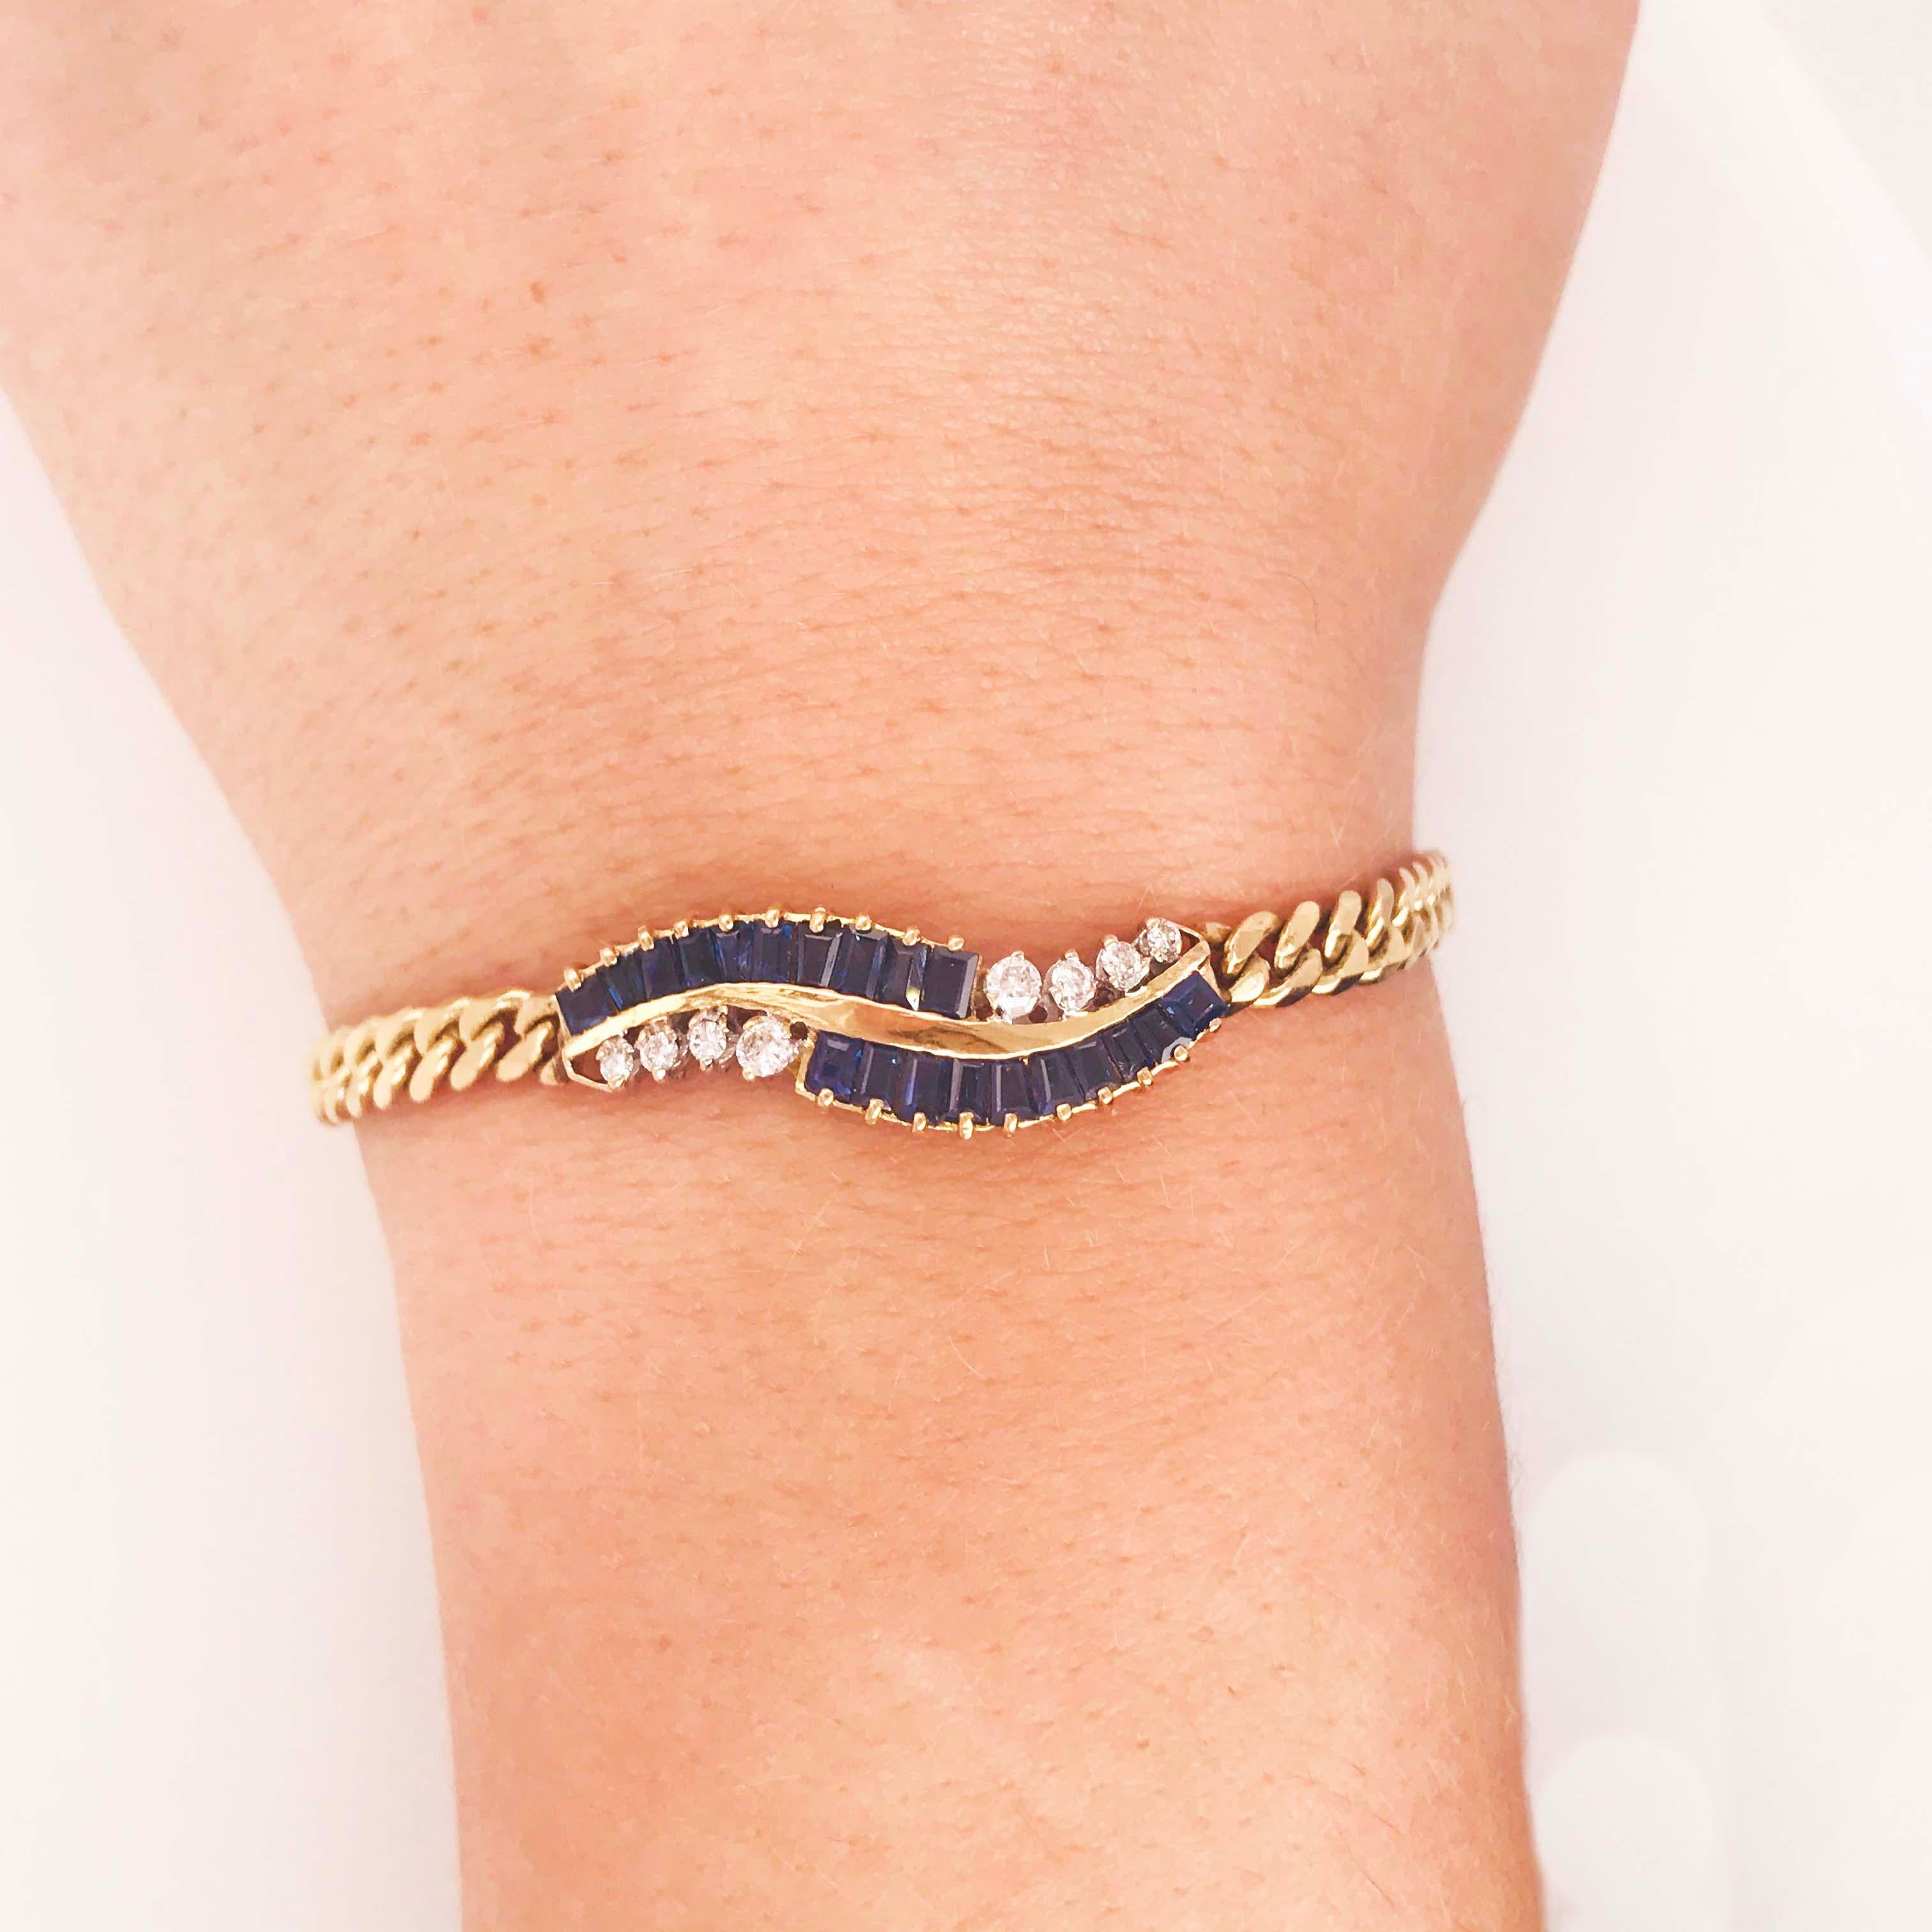 This gorgeous blue sapphire and diamond bracelet is one of a kind and made in the precious metal-14 karat solid gold. The custom diamond and sapphire bracelet has an organic curved shape with deep blue sapphire gemstones and round brilliant diamond